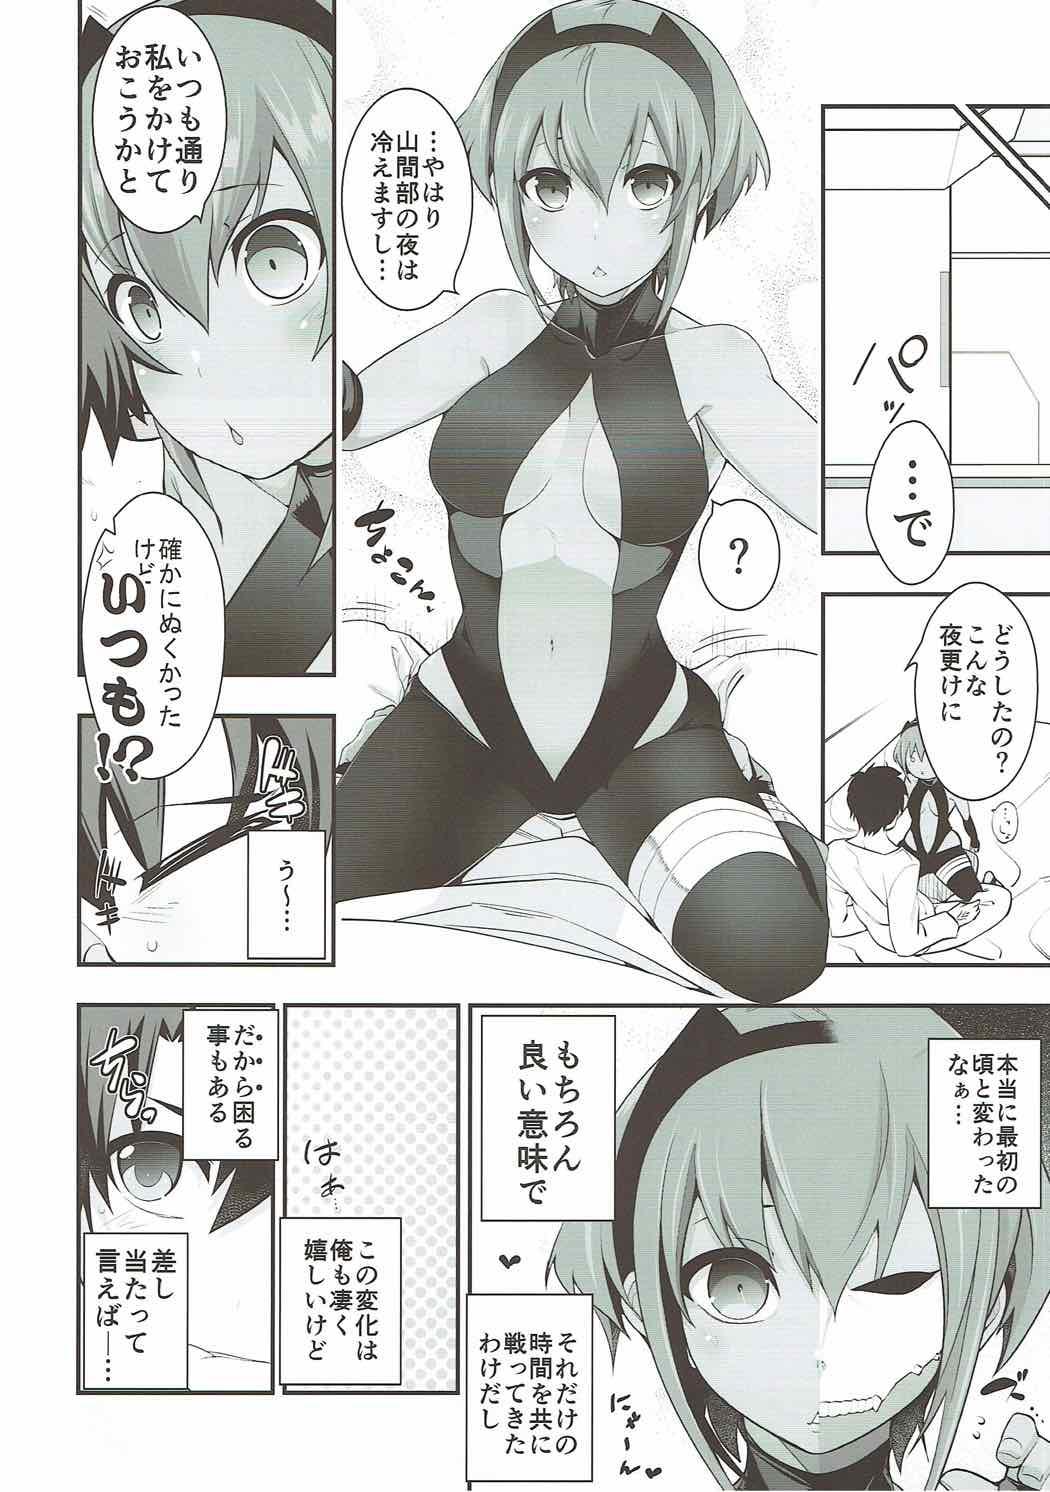 Hogtied Natsuita - Fate grand order Fitness - Page 5